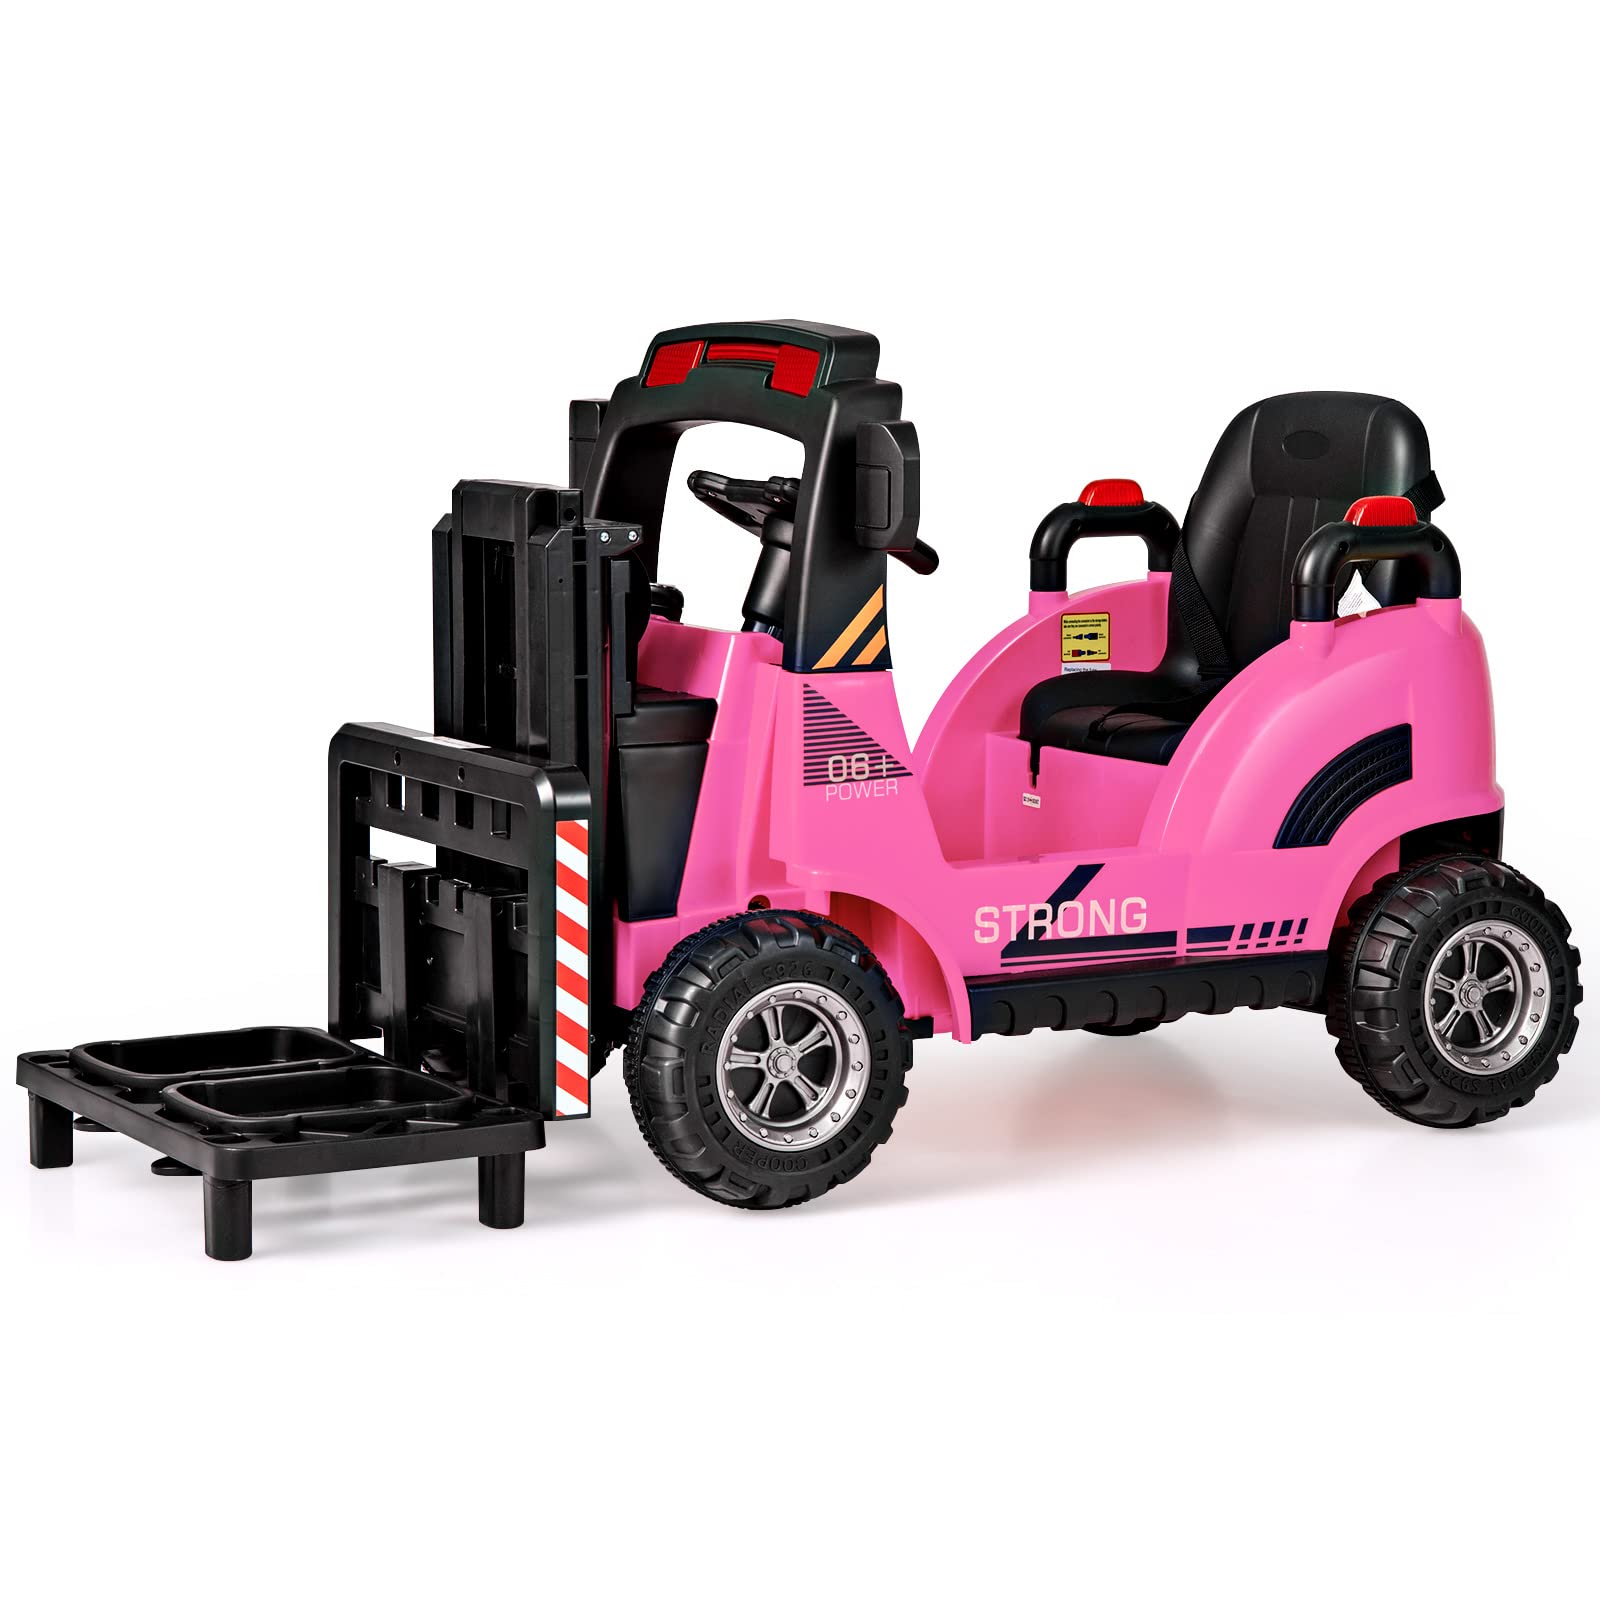 12V Kids Ride On Car, Electric Forklift with Remote Control,Liftable Fork and Pallet,2 Speeds - Pink